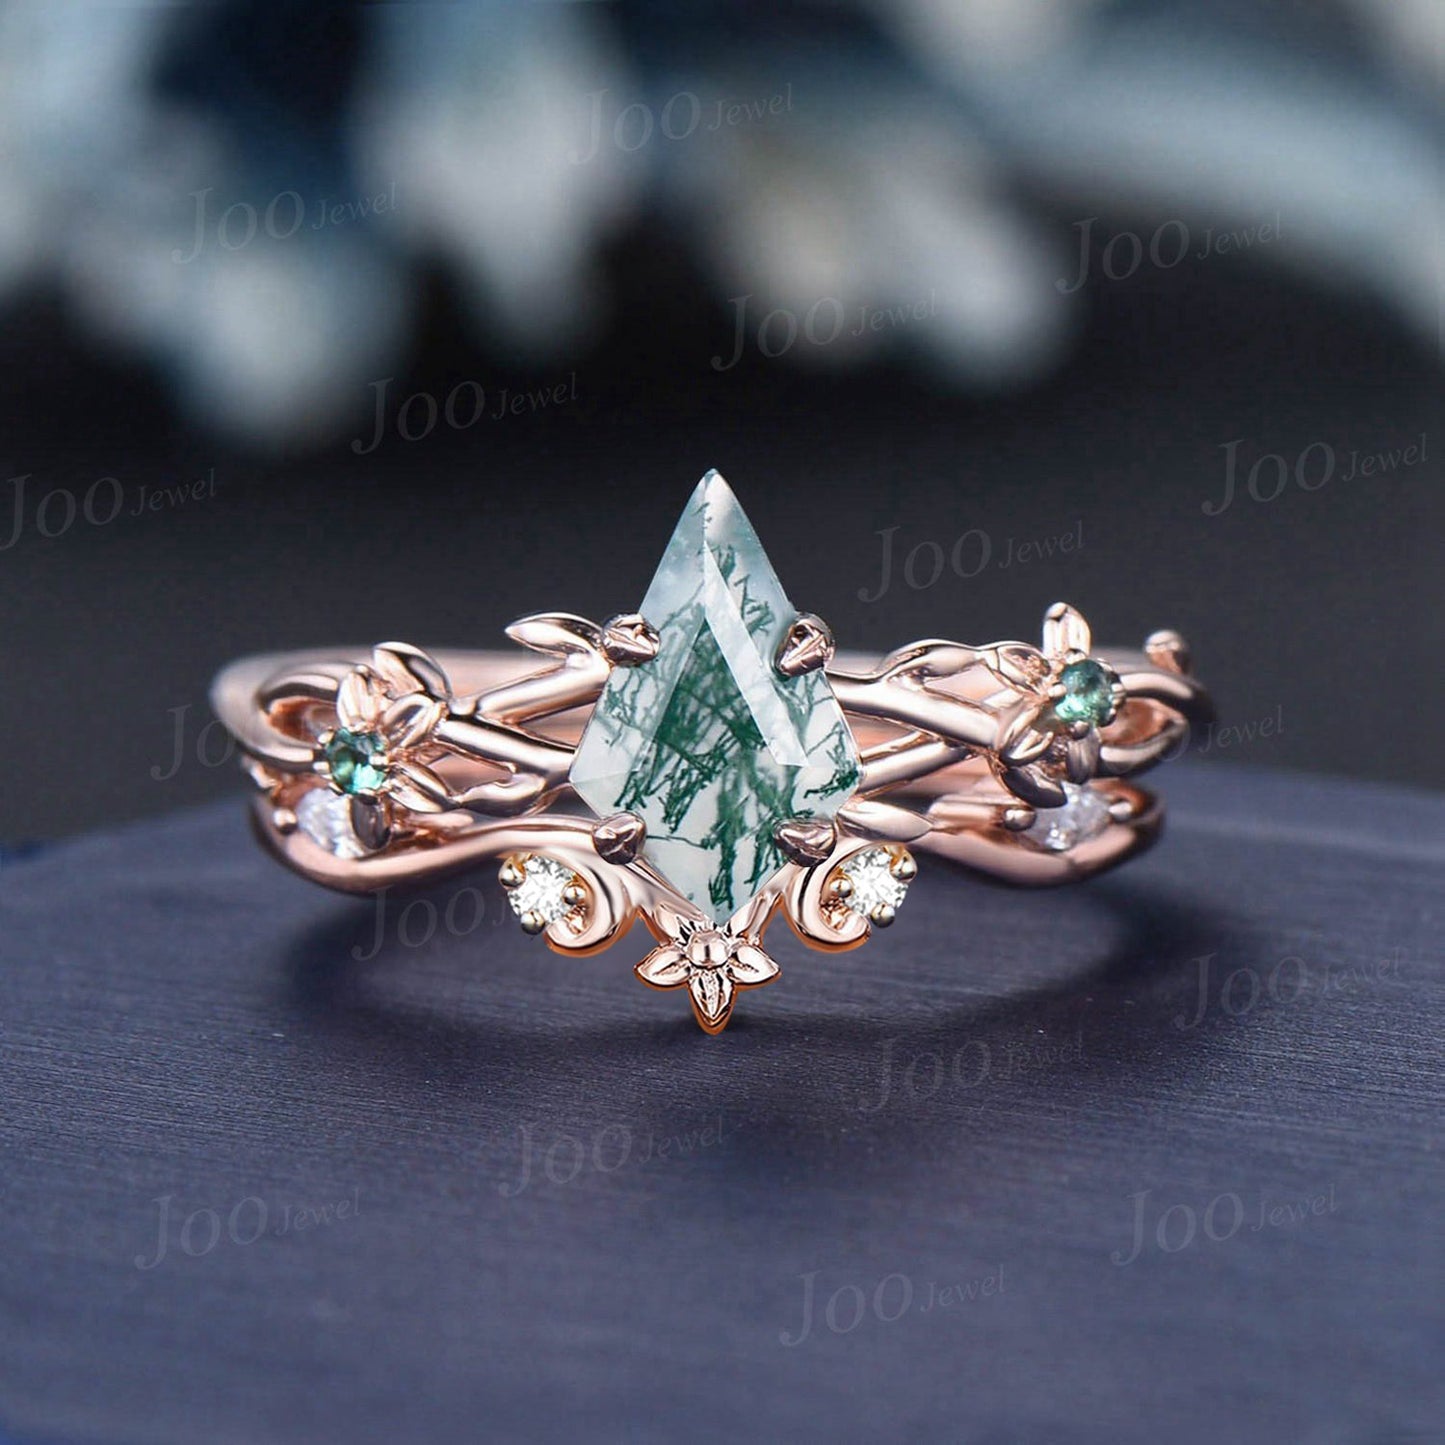 1ct Nature Inspired Floral Bridal Set Kite Moss Agate Emerald Engagement Ring Branch Twig Vine Wedding Ring Vintage Aquatic Agate Jewelry